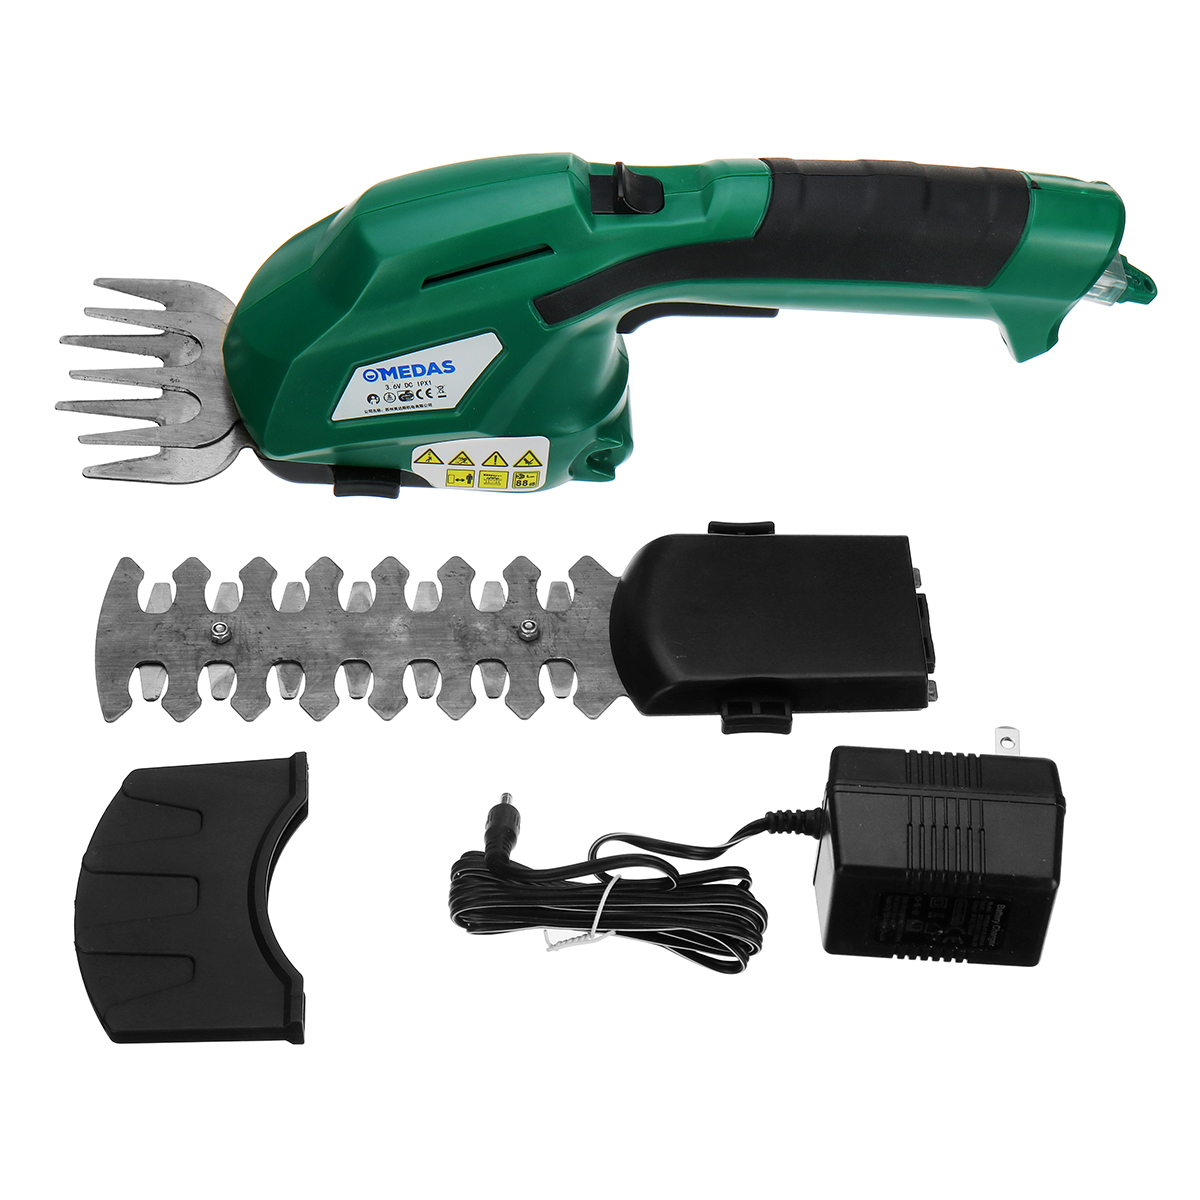 

2 in 1 Li-Ion Battery Pruning Tool Cordless Hedge Grass Shears Trimmers Cutters Shrub Tool